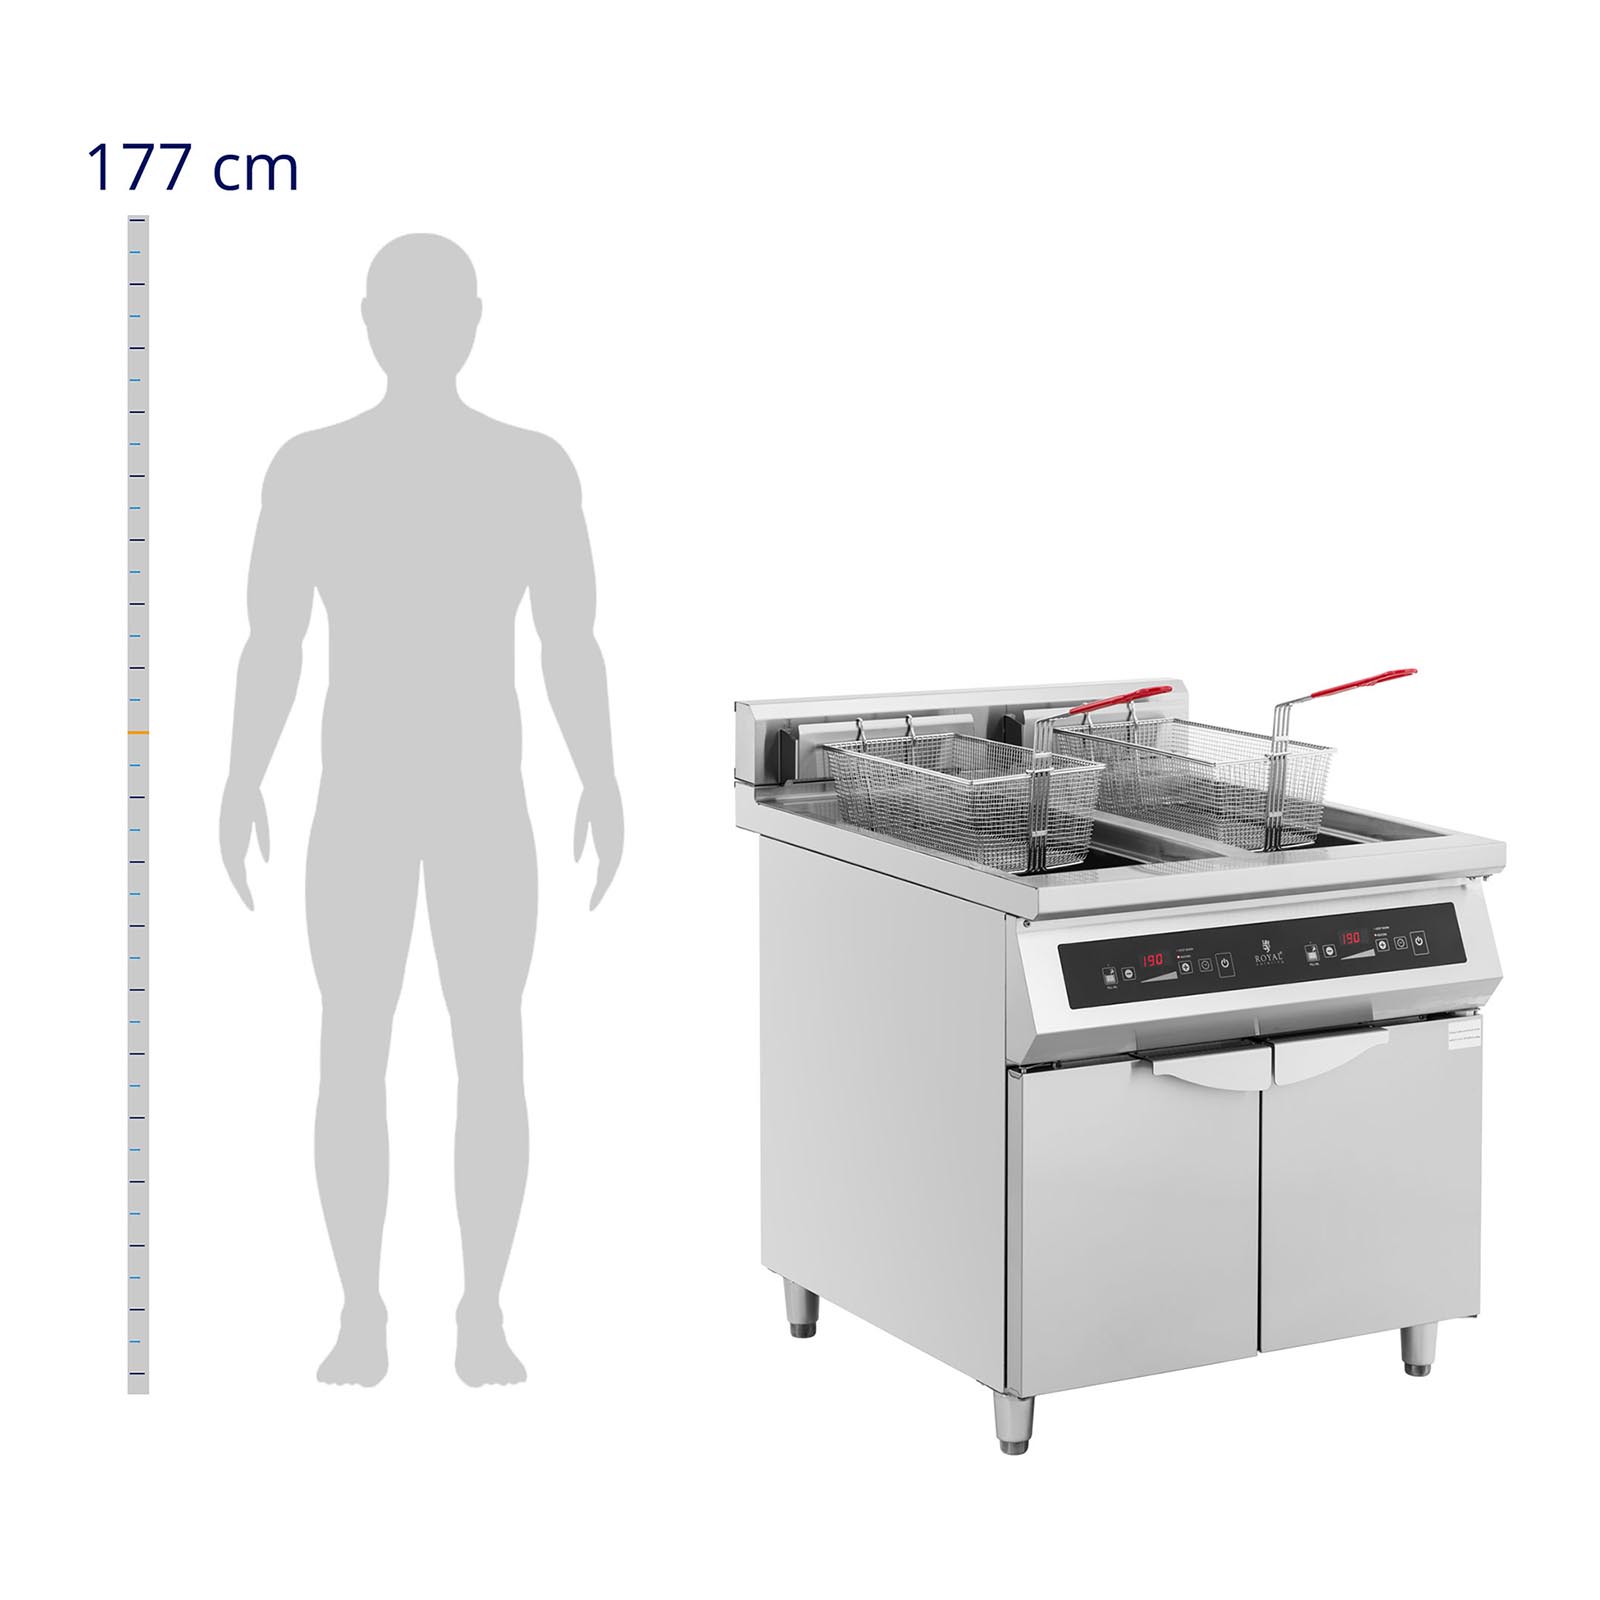 Induktionsfritteuse - 2 x 30 L - 60 bis 190 °C - Royal Catering